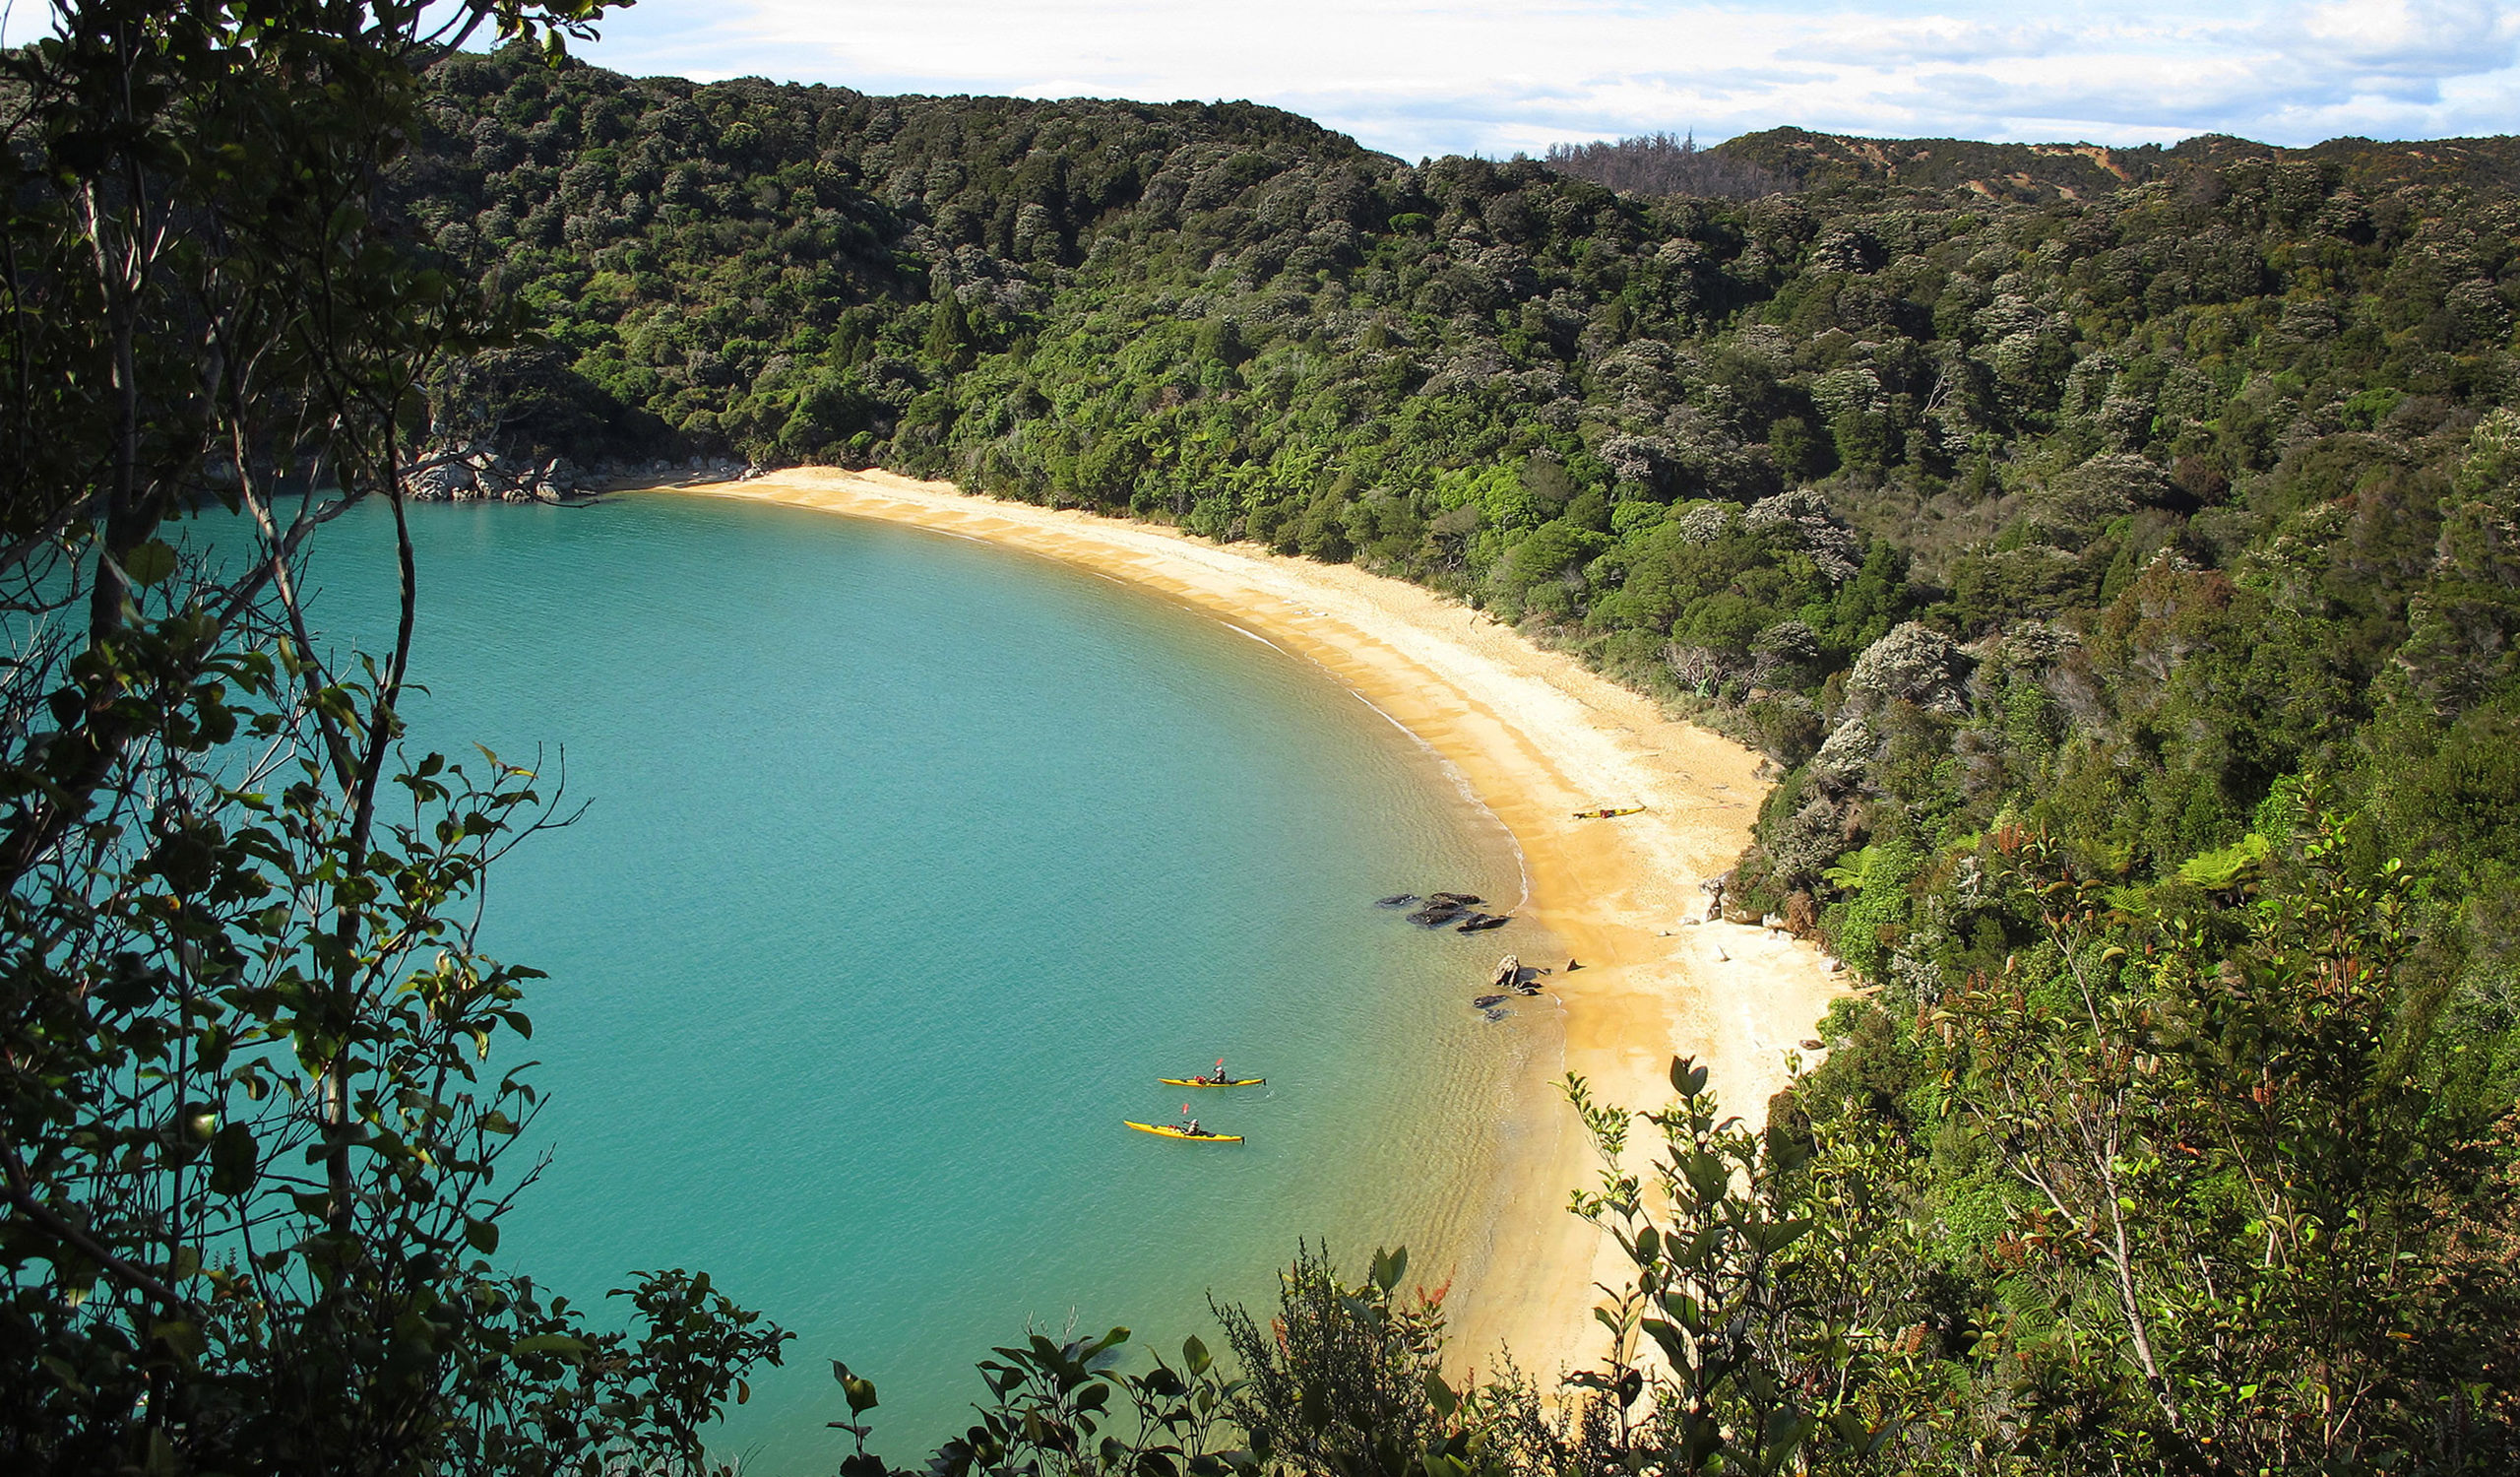 Blessed with a mild climate, golden beaches and lush coastal native bush, the Abel Tasman Coast Track has it all.